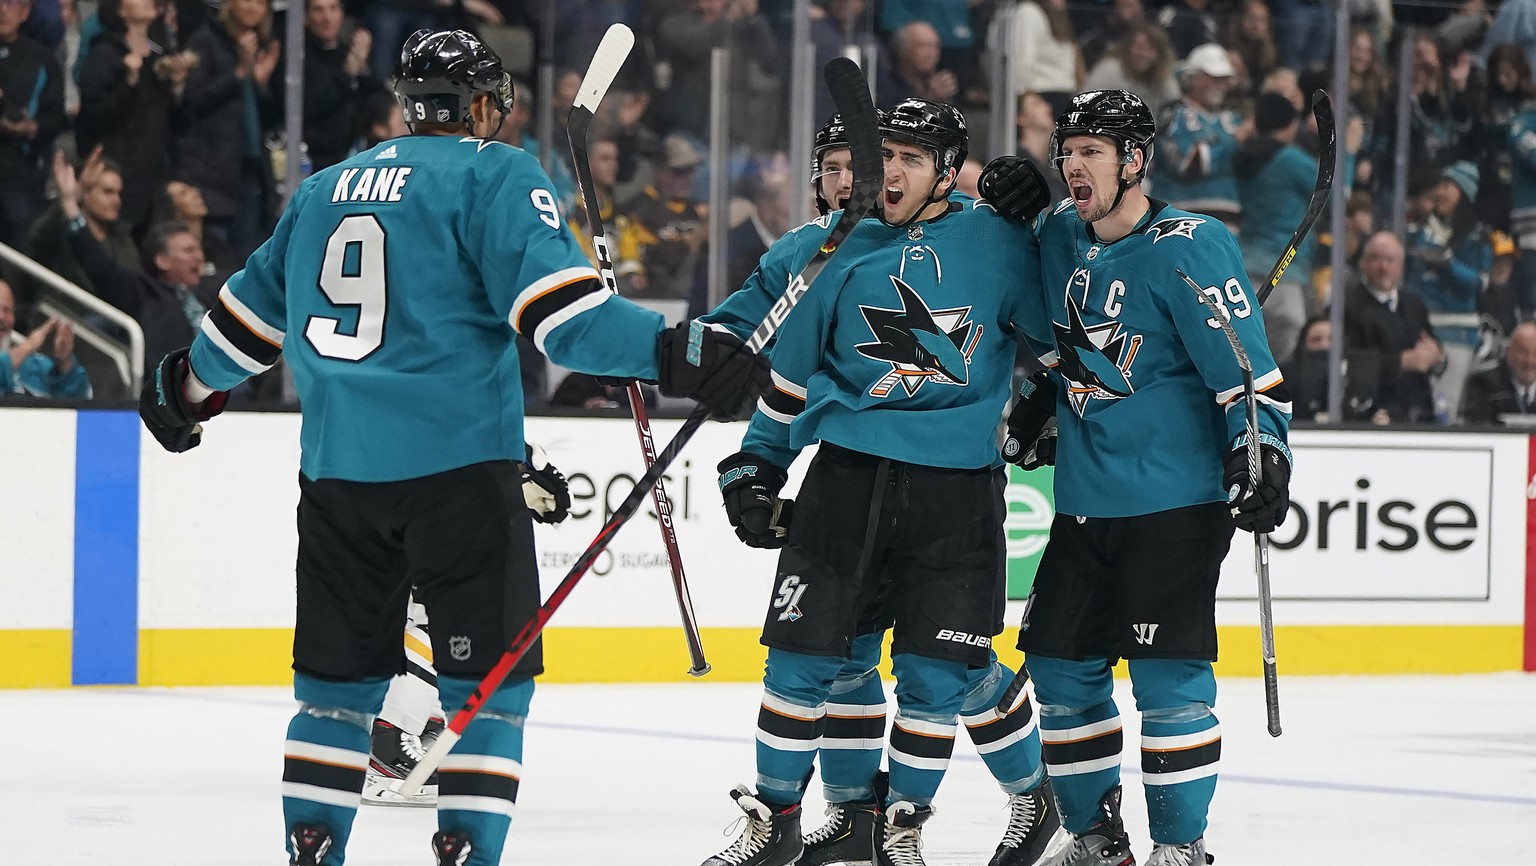 San Jose Sharks center Logan Couture (39) celebrates with teammates Evander Kane (9) and Timo Meier, center, after scoring a goal against the Pittsburgh Penguins during the third period of an NHL hock ...